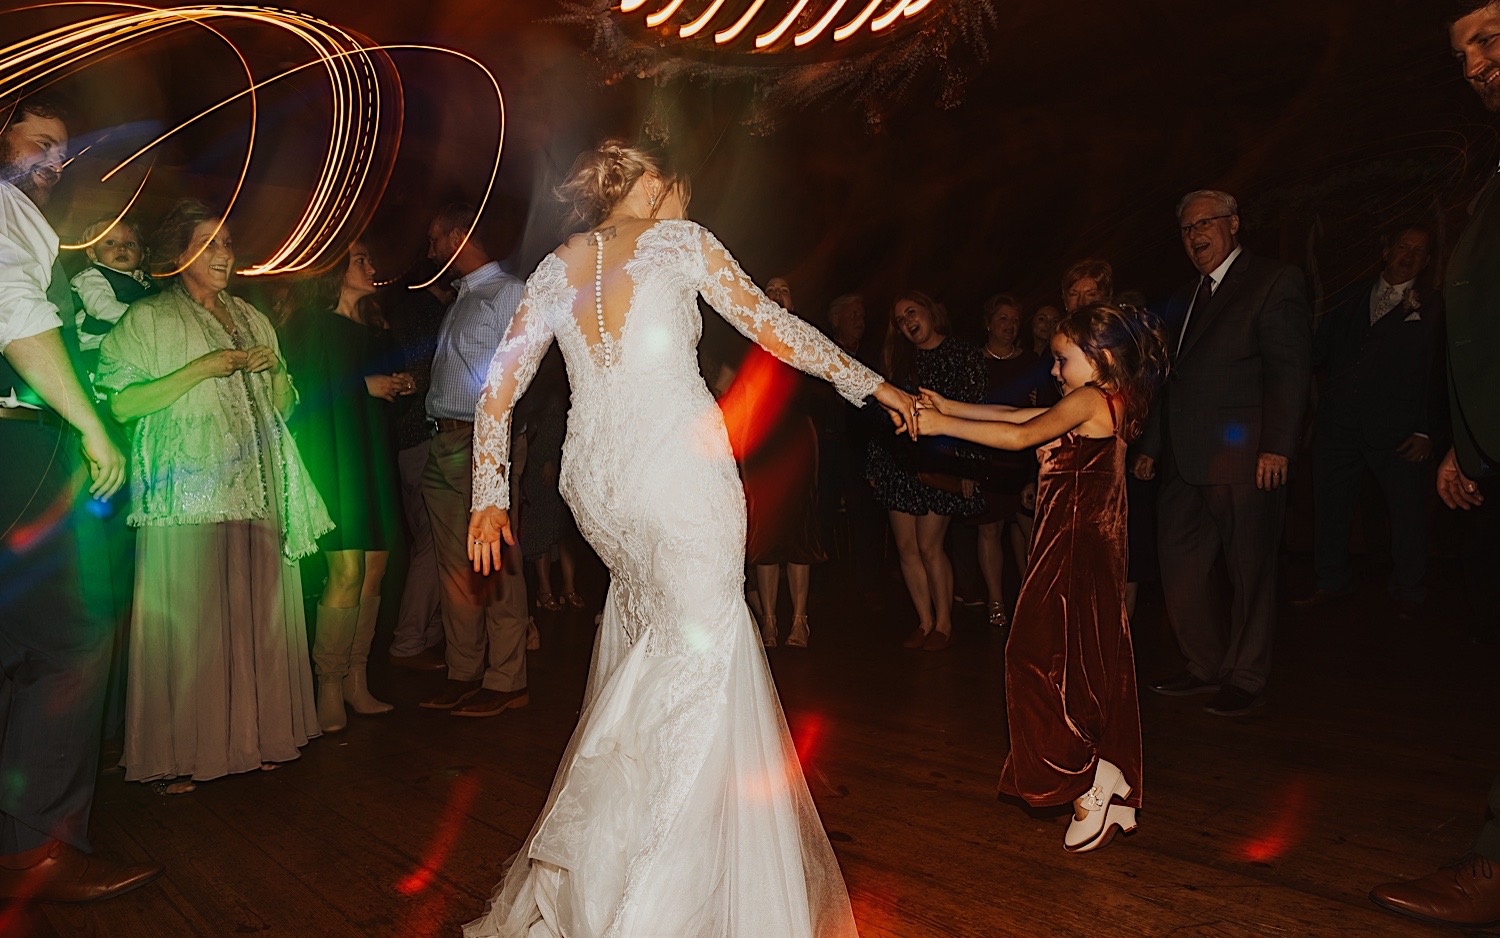 A bride dances with a young girl while in a dance circle during an indoor wedding reception at Lake Bomoseen Lodge in Vermont